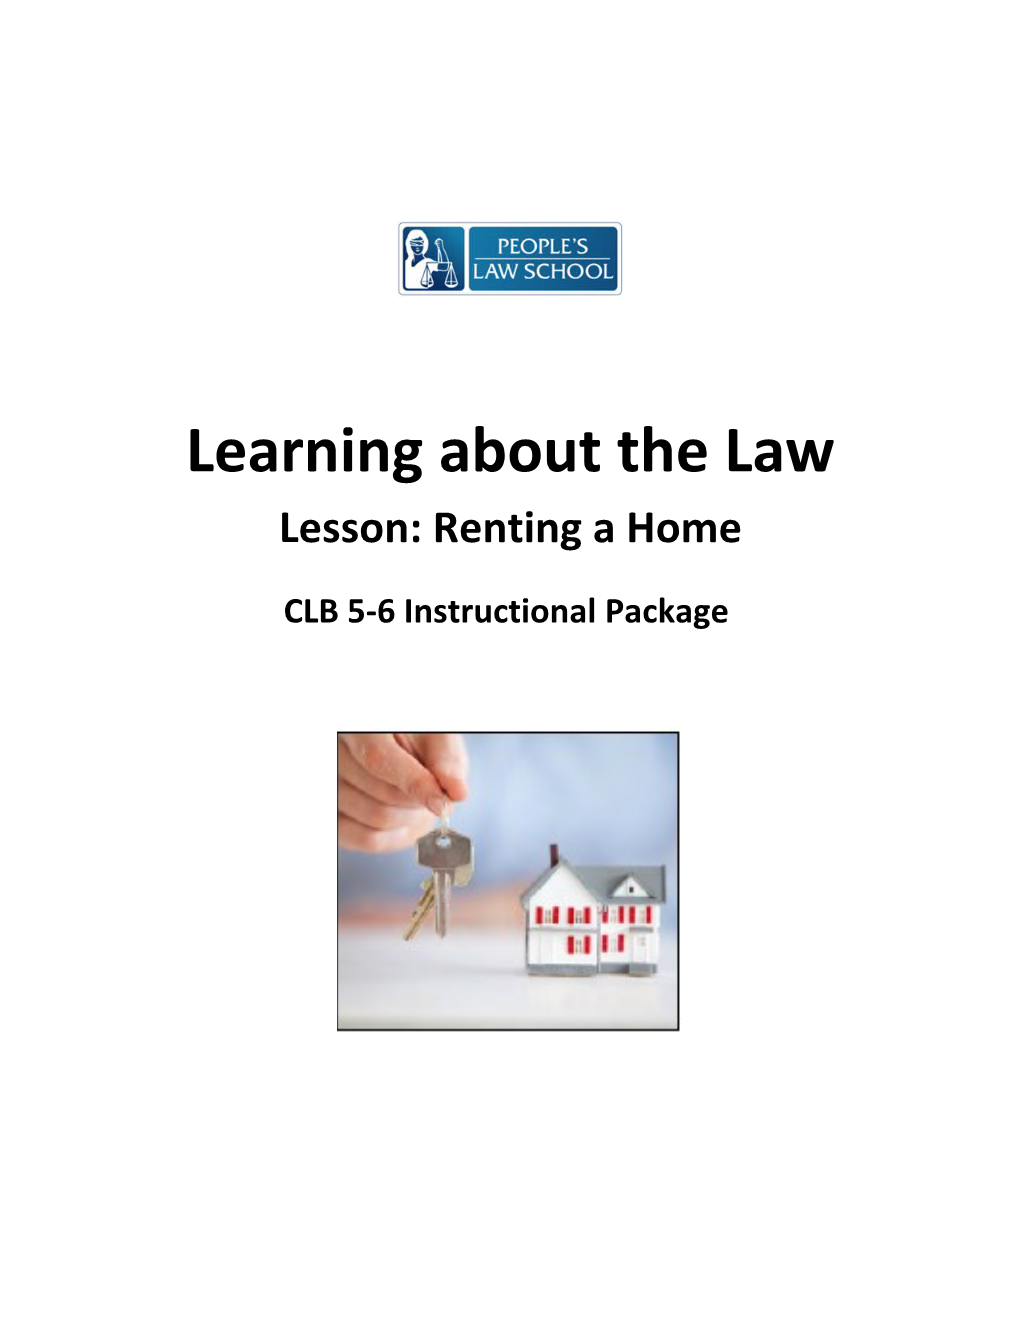 Learning About the Law Lesson: Renting a Home